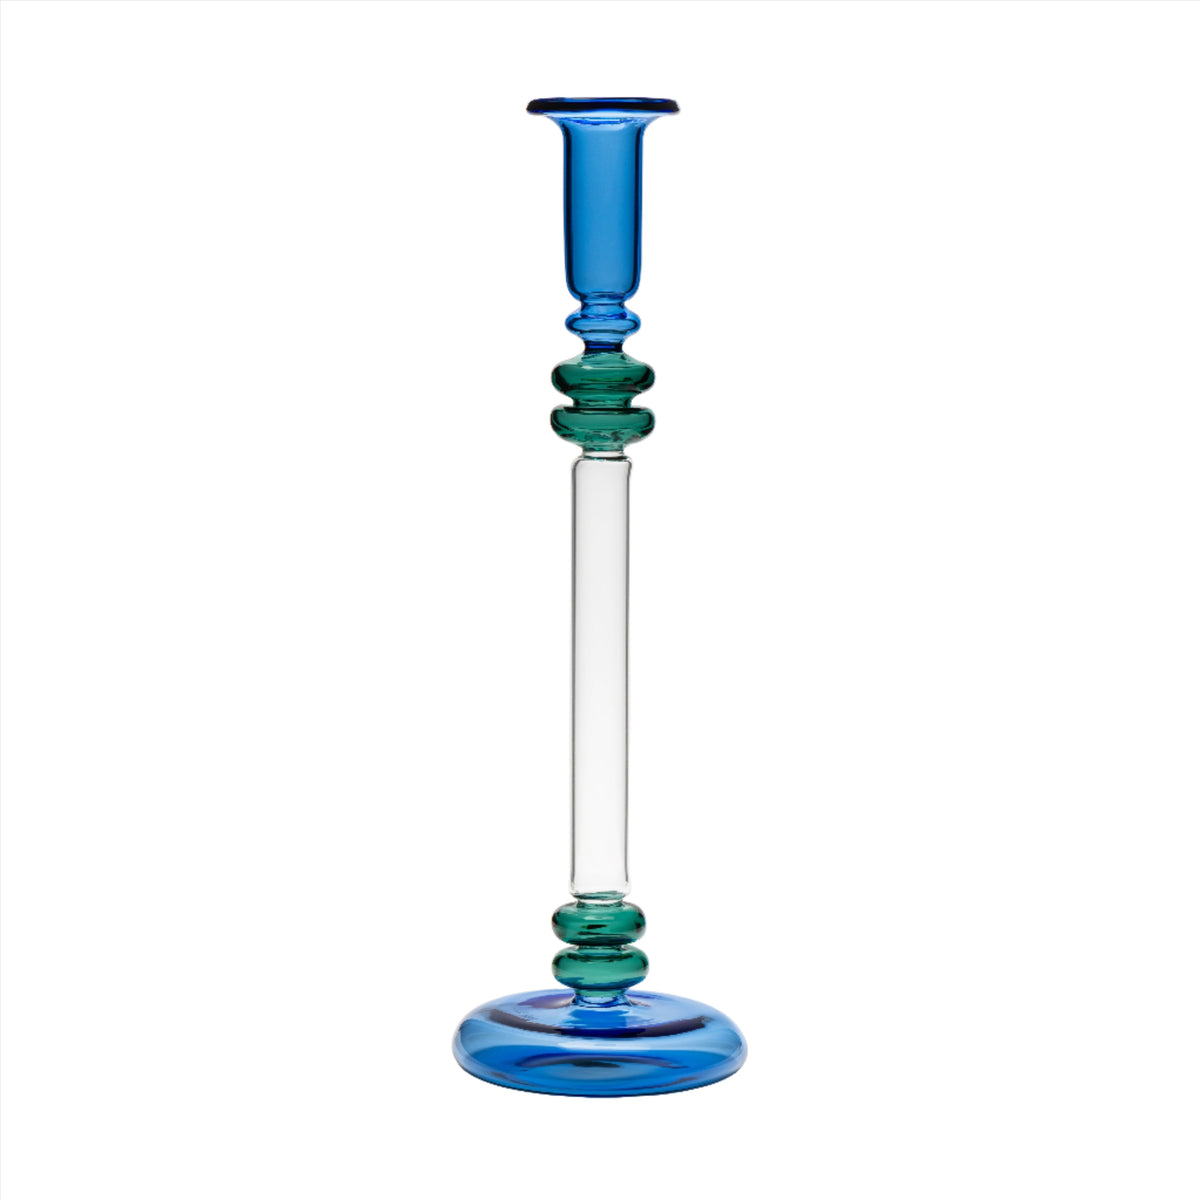 Bugle Glass Candlestick in Blue & Teal